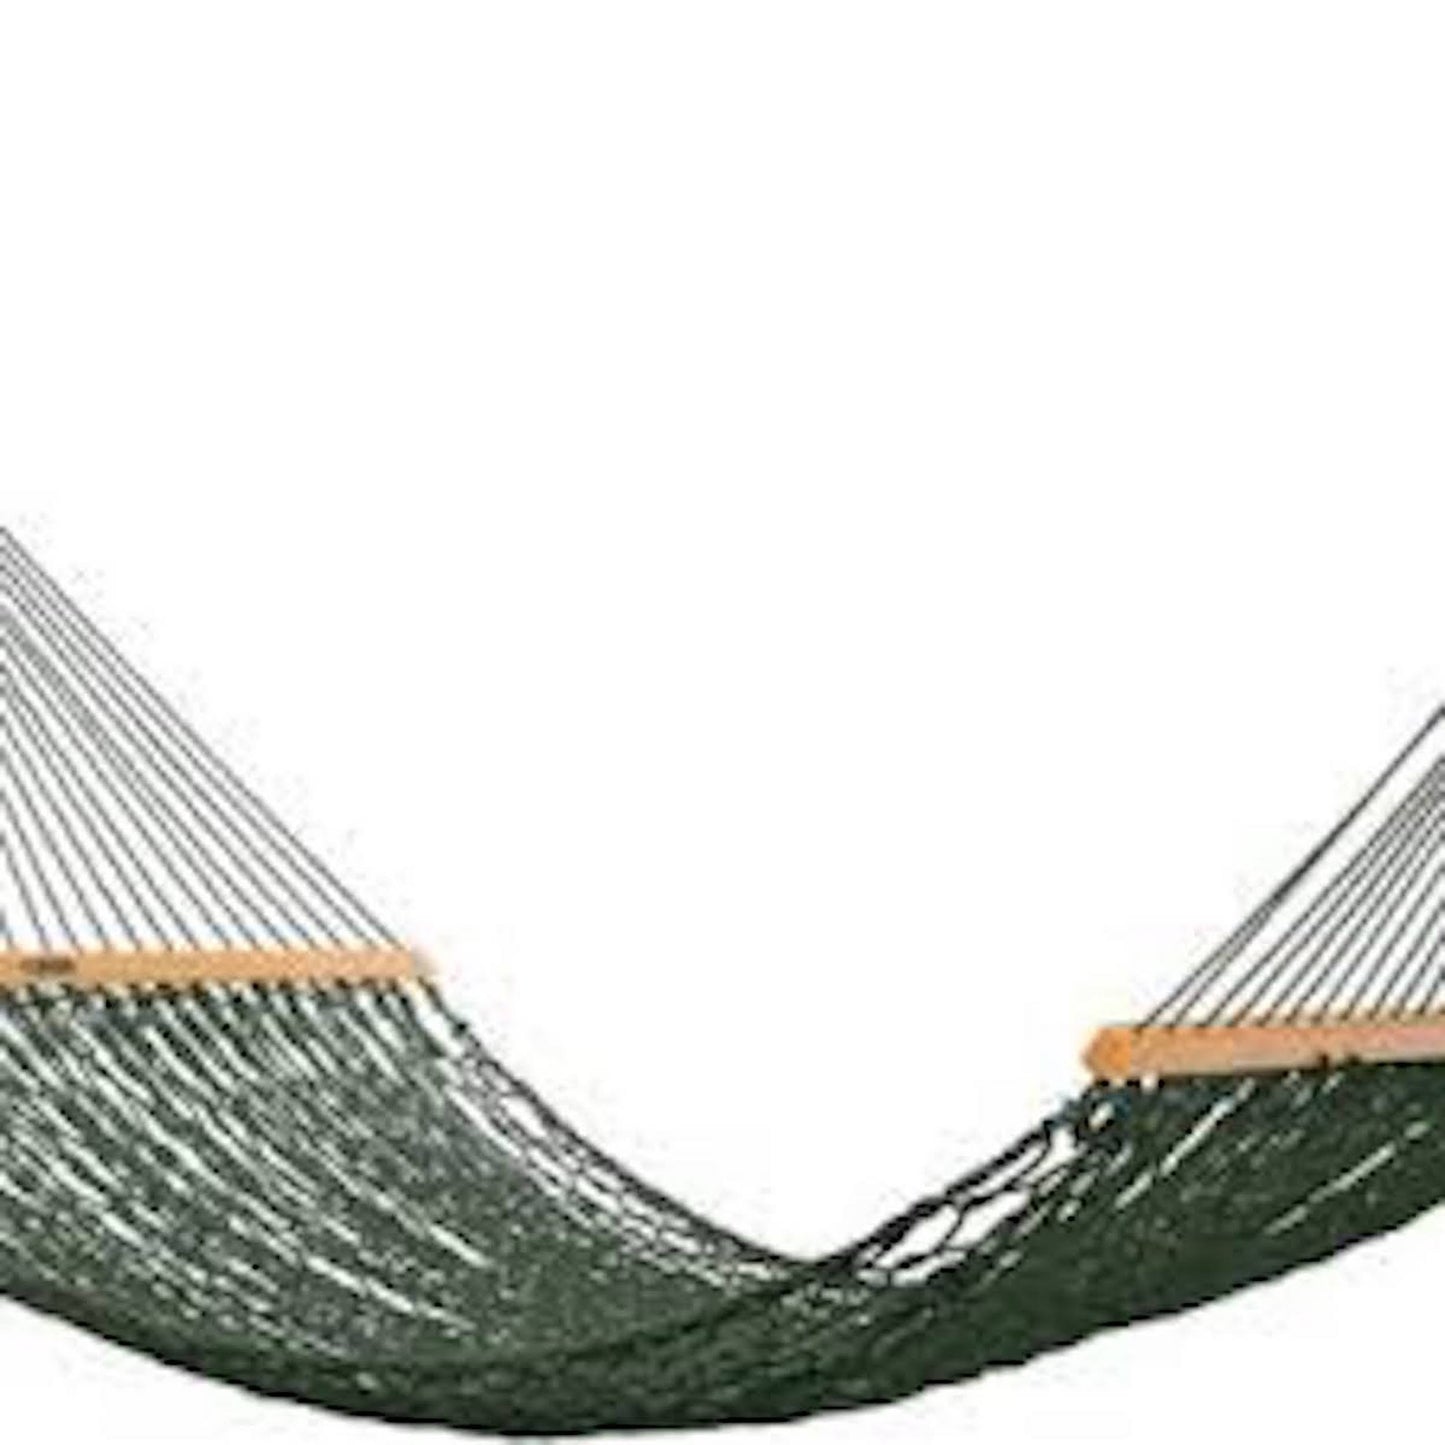 3 Ft. 8 in Wide x  11 Ft Overall Length | Green Colour Polyester Rope Hammock | Single